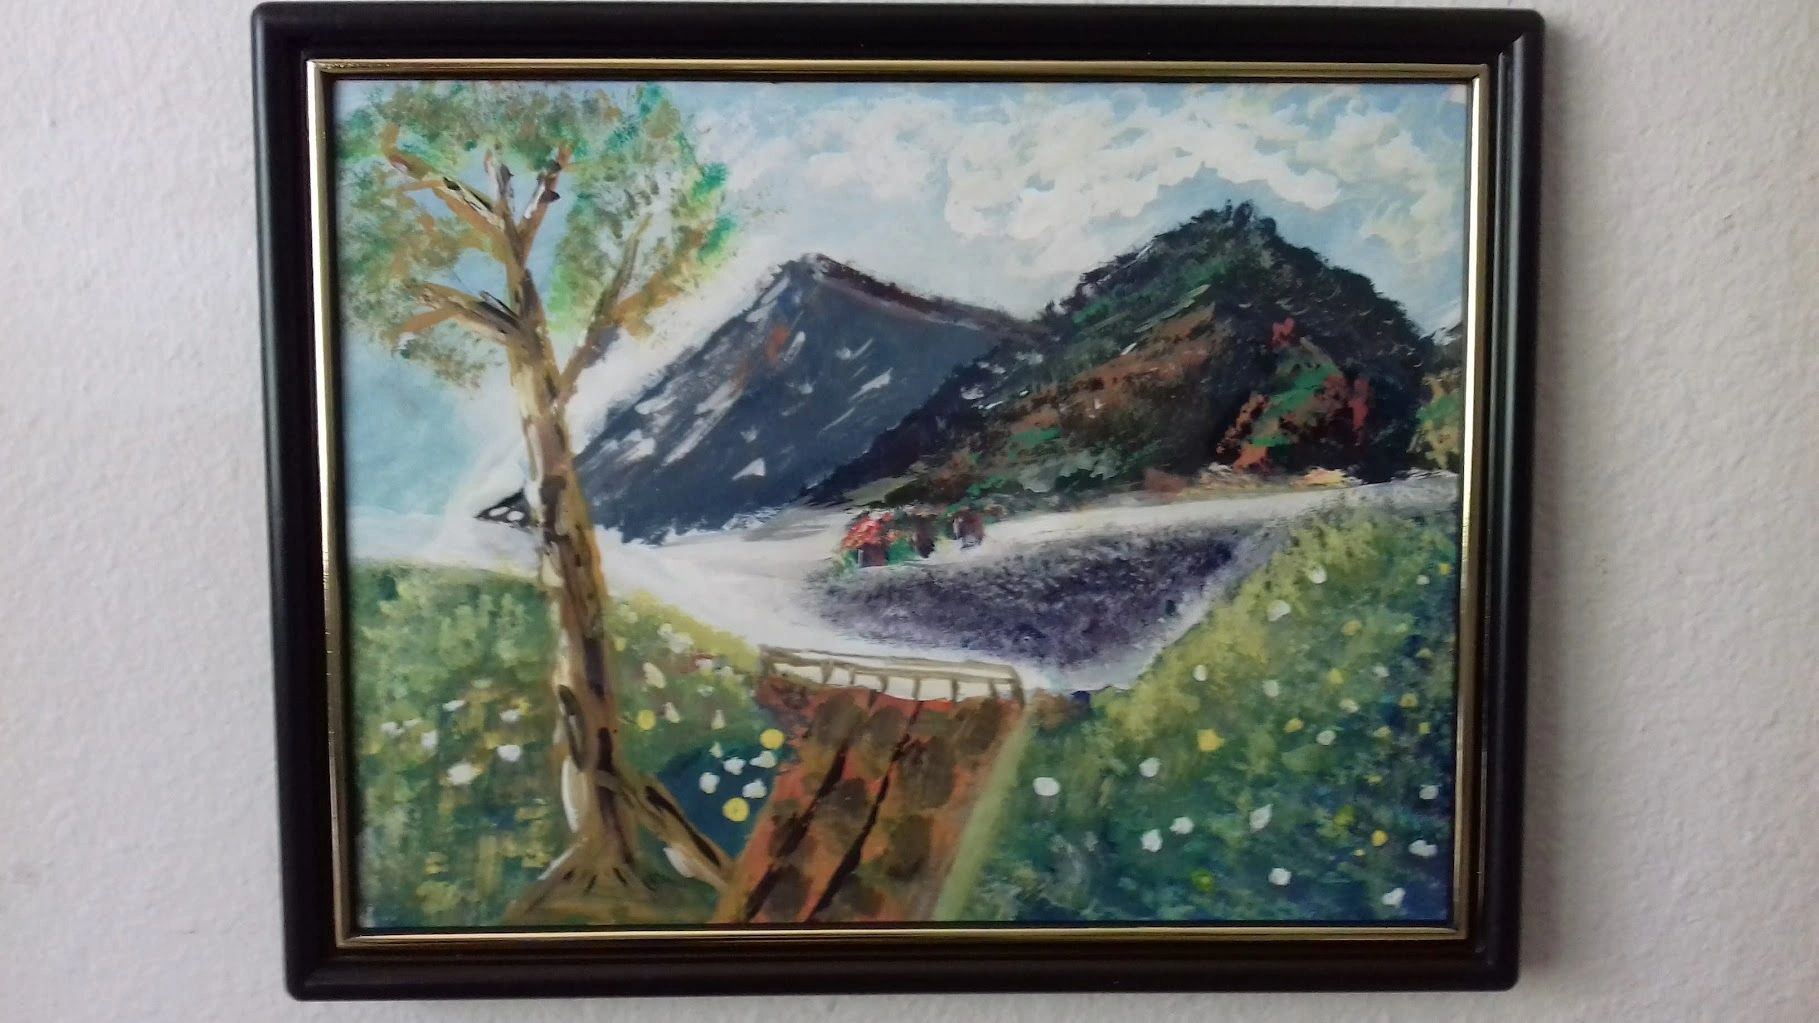 Acrylic brush painting in a frame.